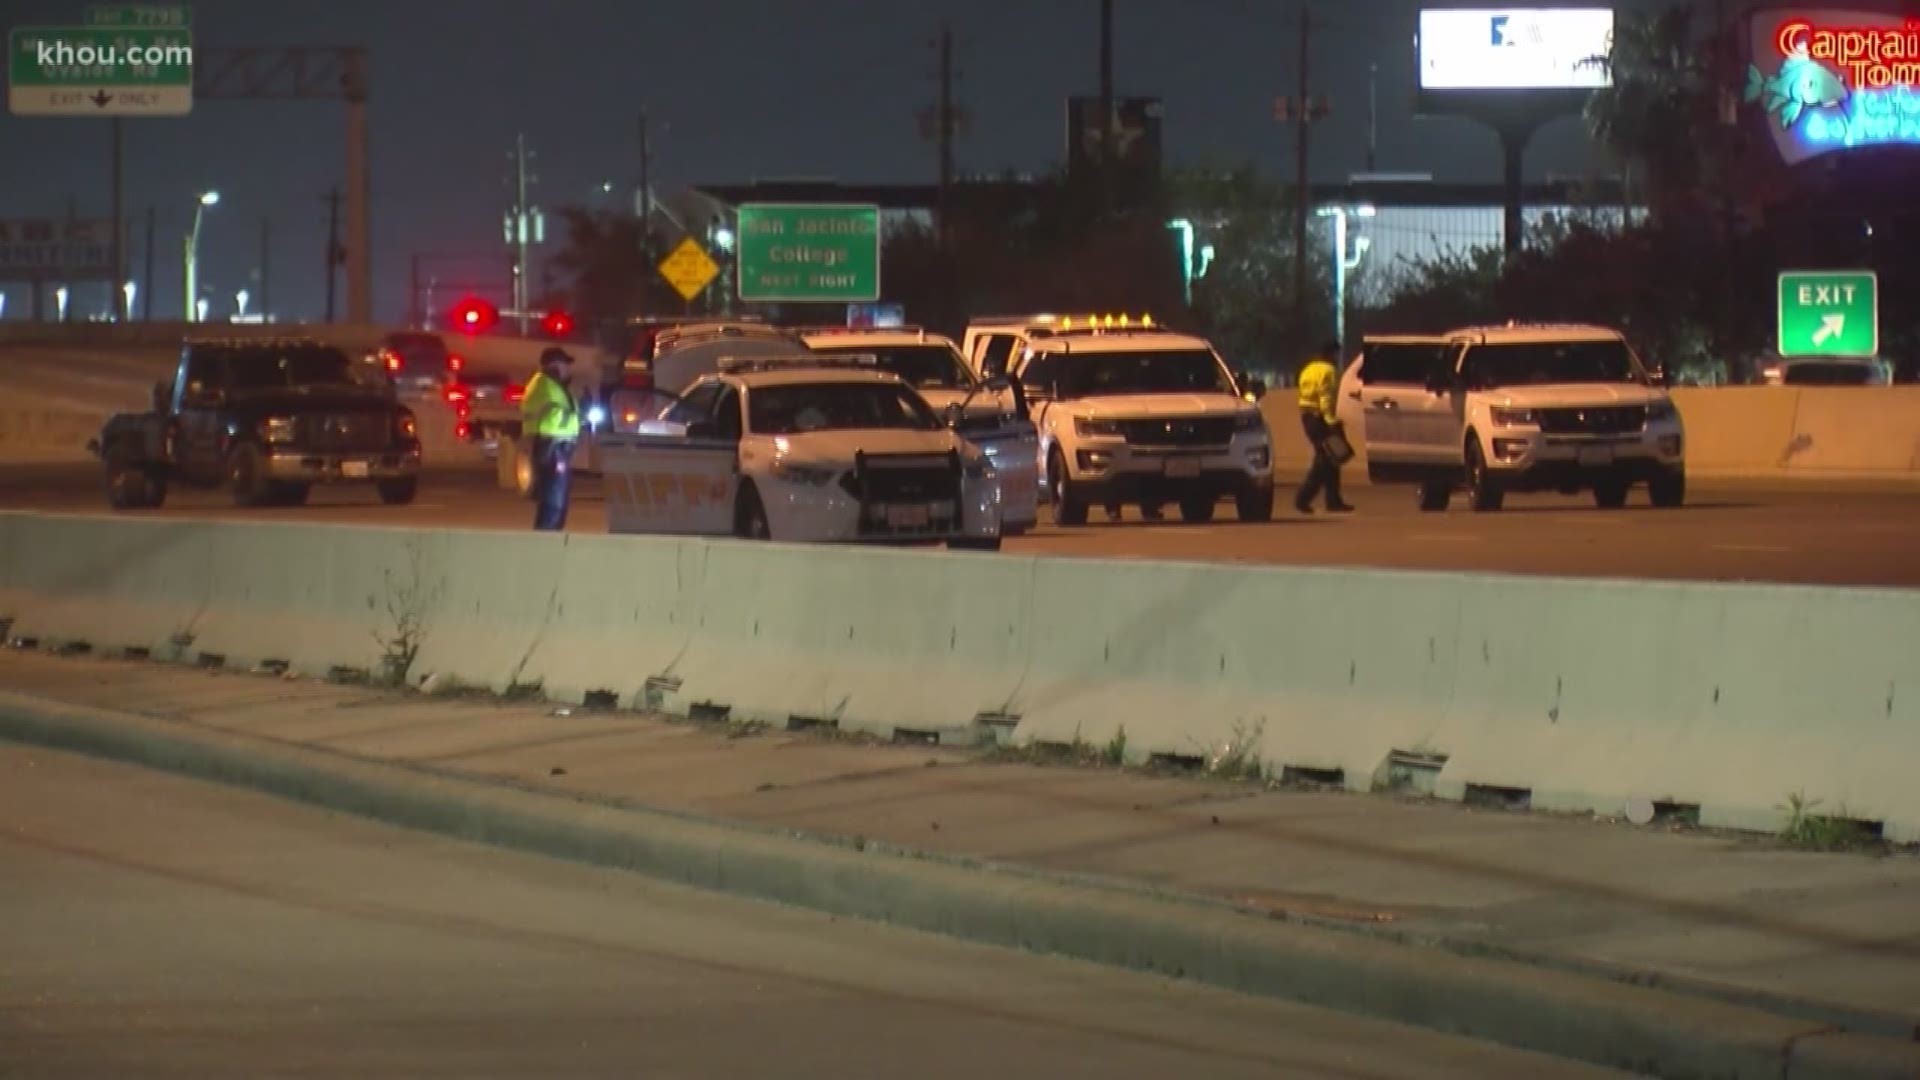 A woman is dead after police said she was struck by several vehicles while attempting to cross the mainlanes of the East Freeway.